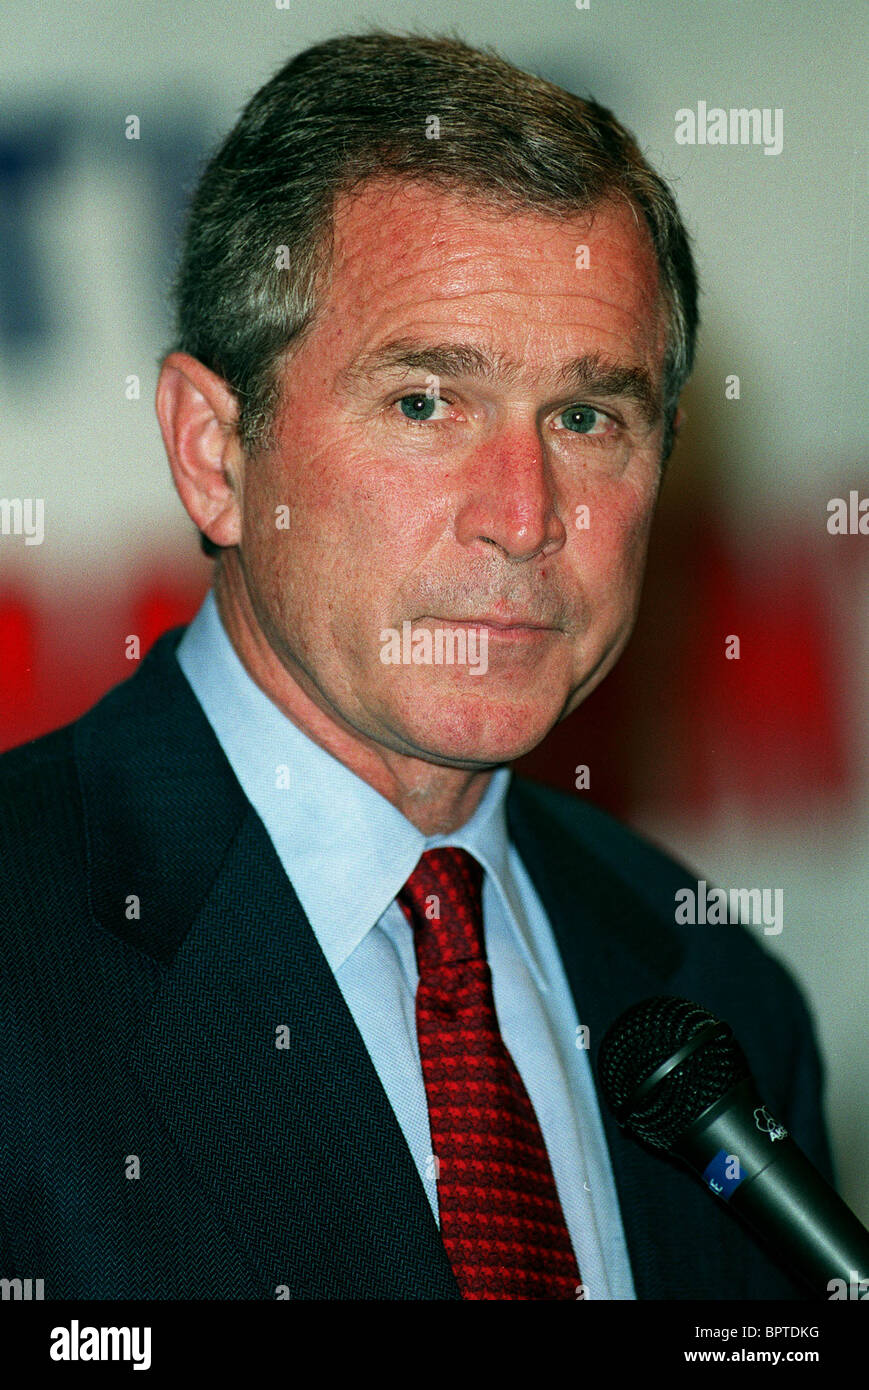 GEORGE W. BUSH GOVERNOR OF TEXAS 05 March 2000 Stock Photo